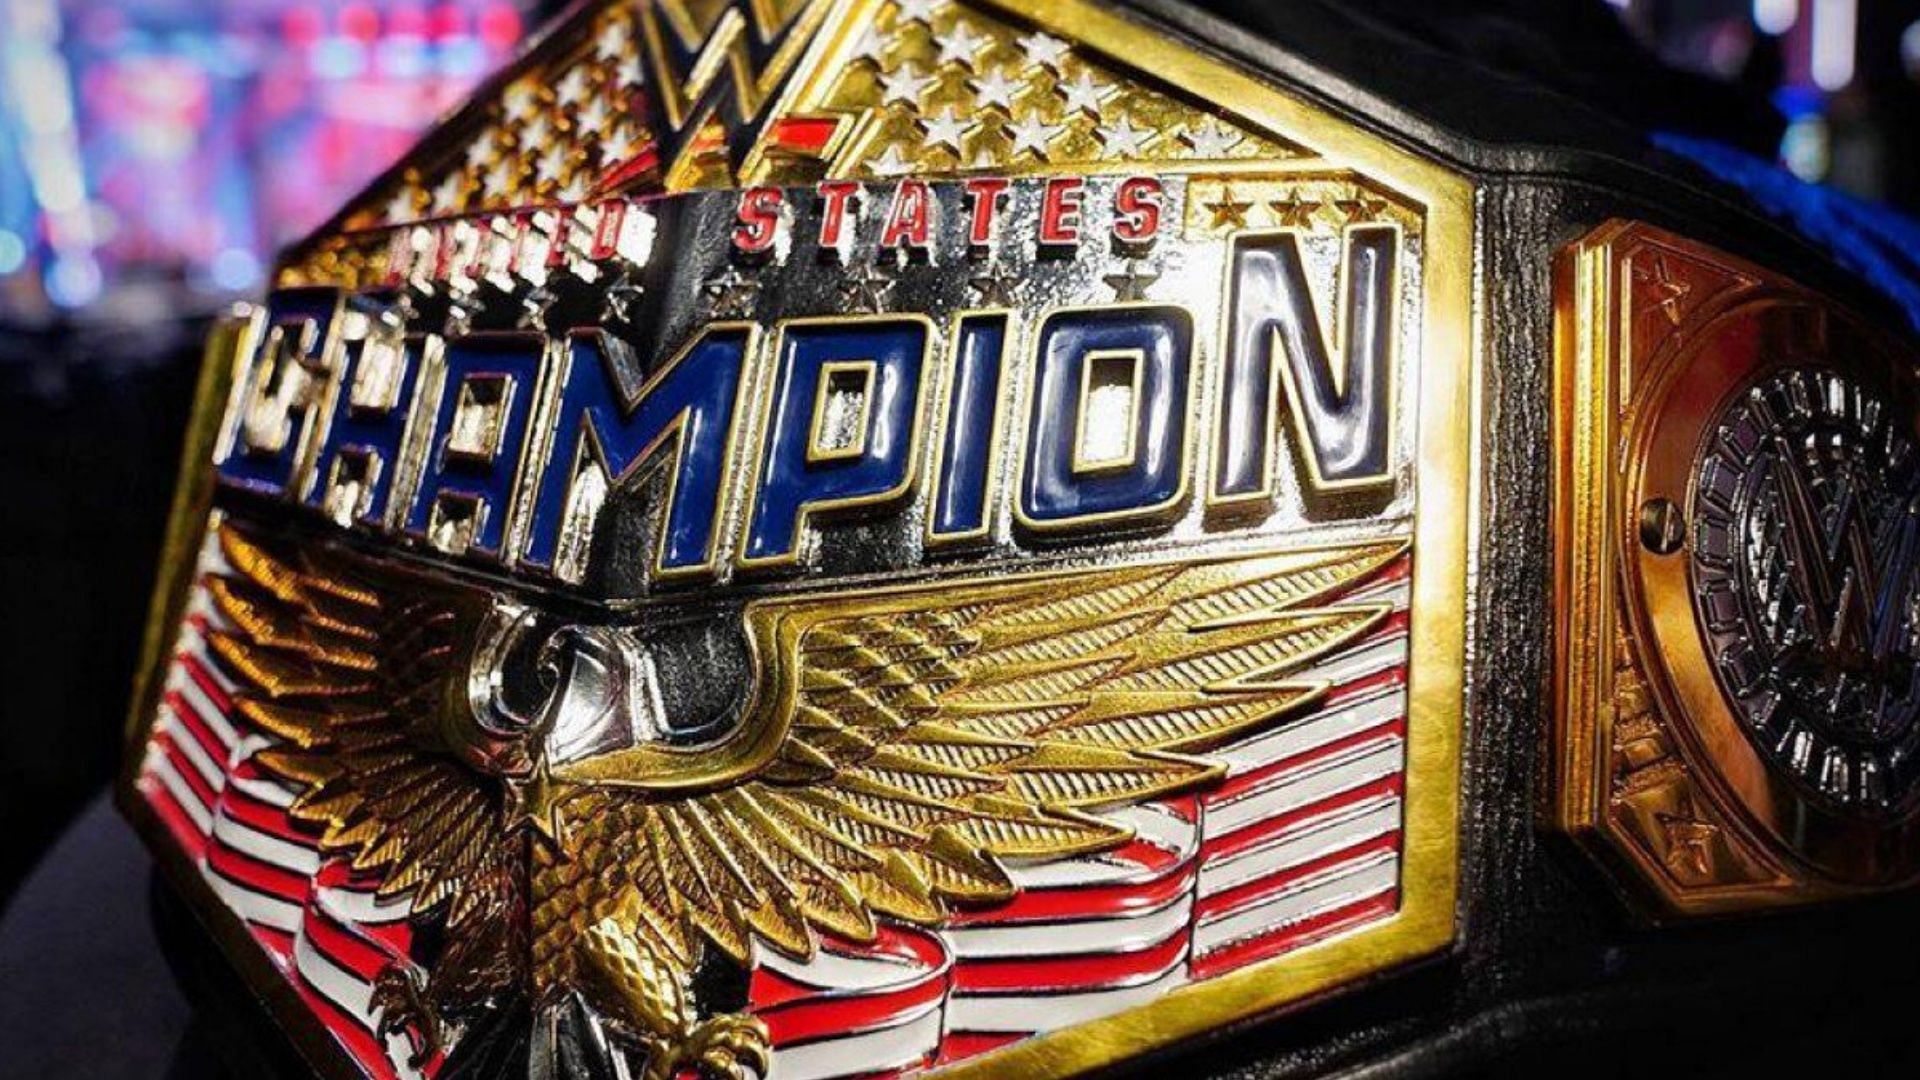 The United States Championship was drafted to SmackDown as part of WWE Draft 2023.